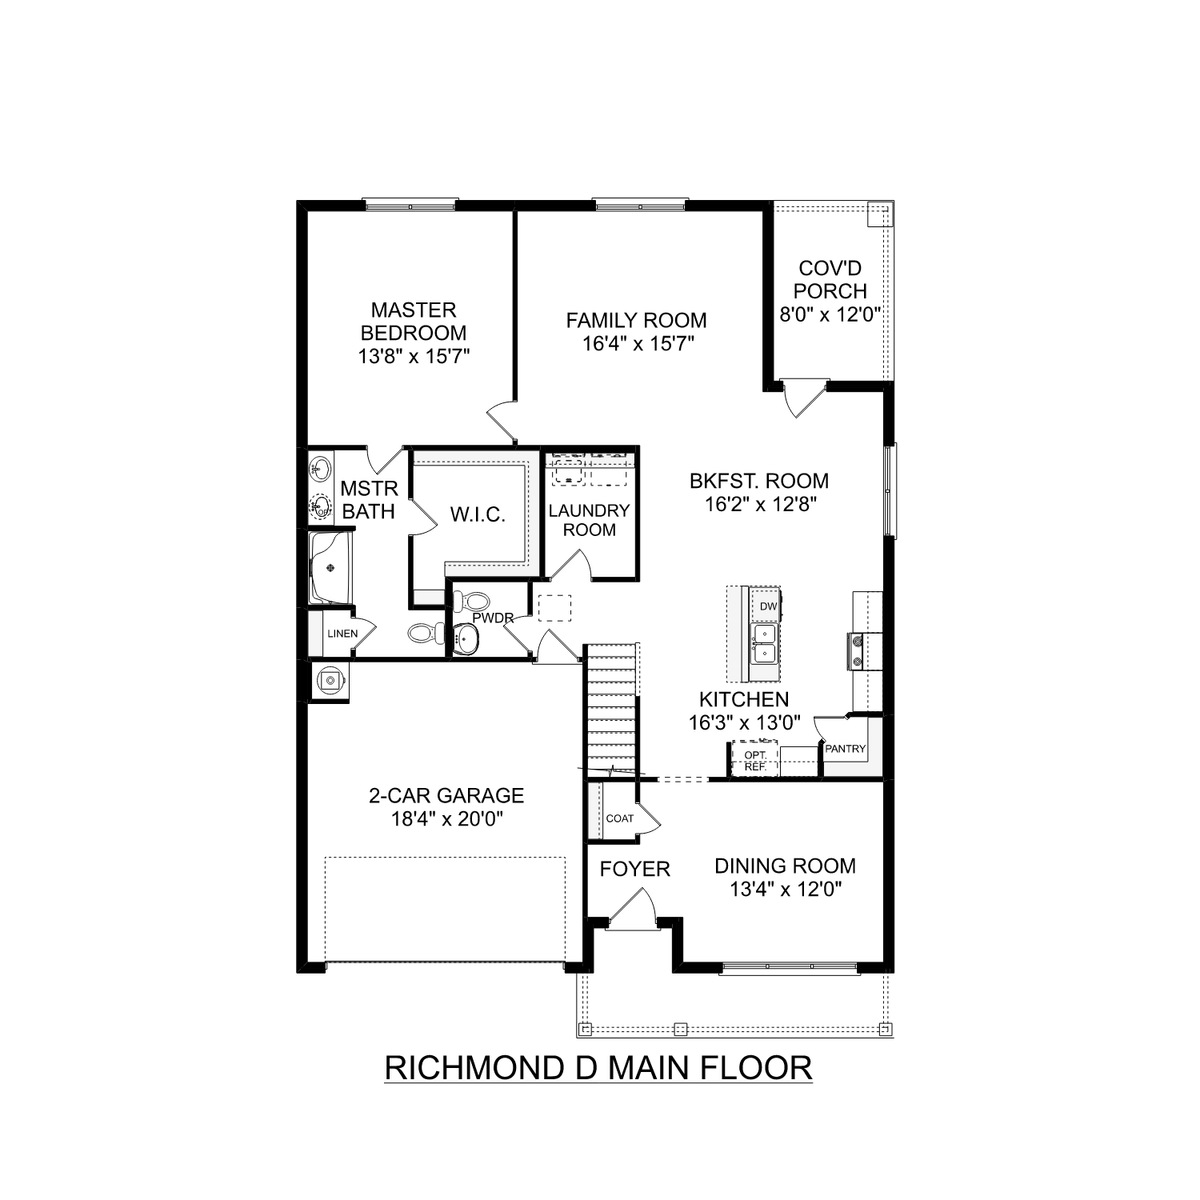 1 - The Richmond D buildable floor plan layout in Davidson Homes' The Reserve at North Ridge community.